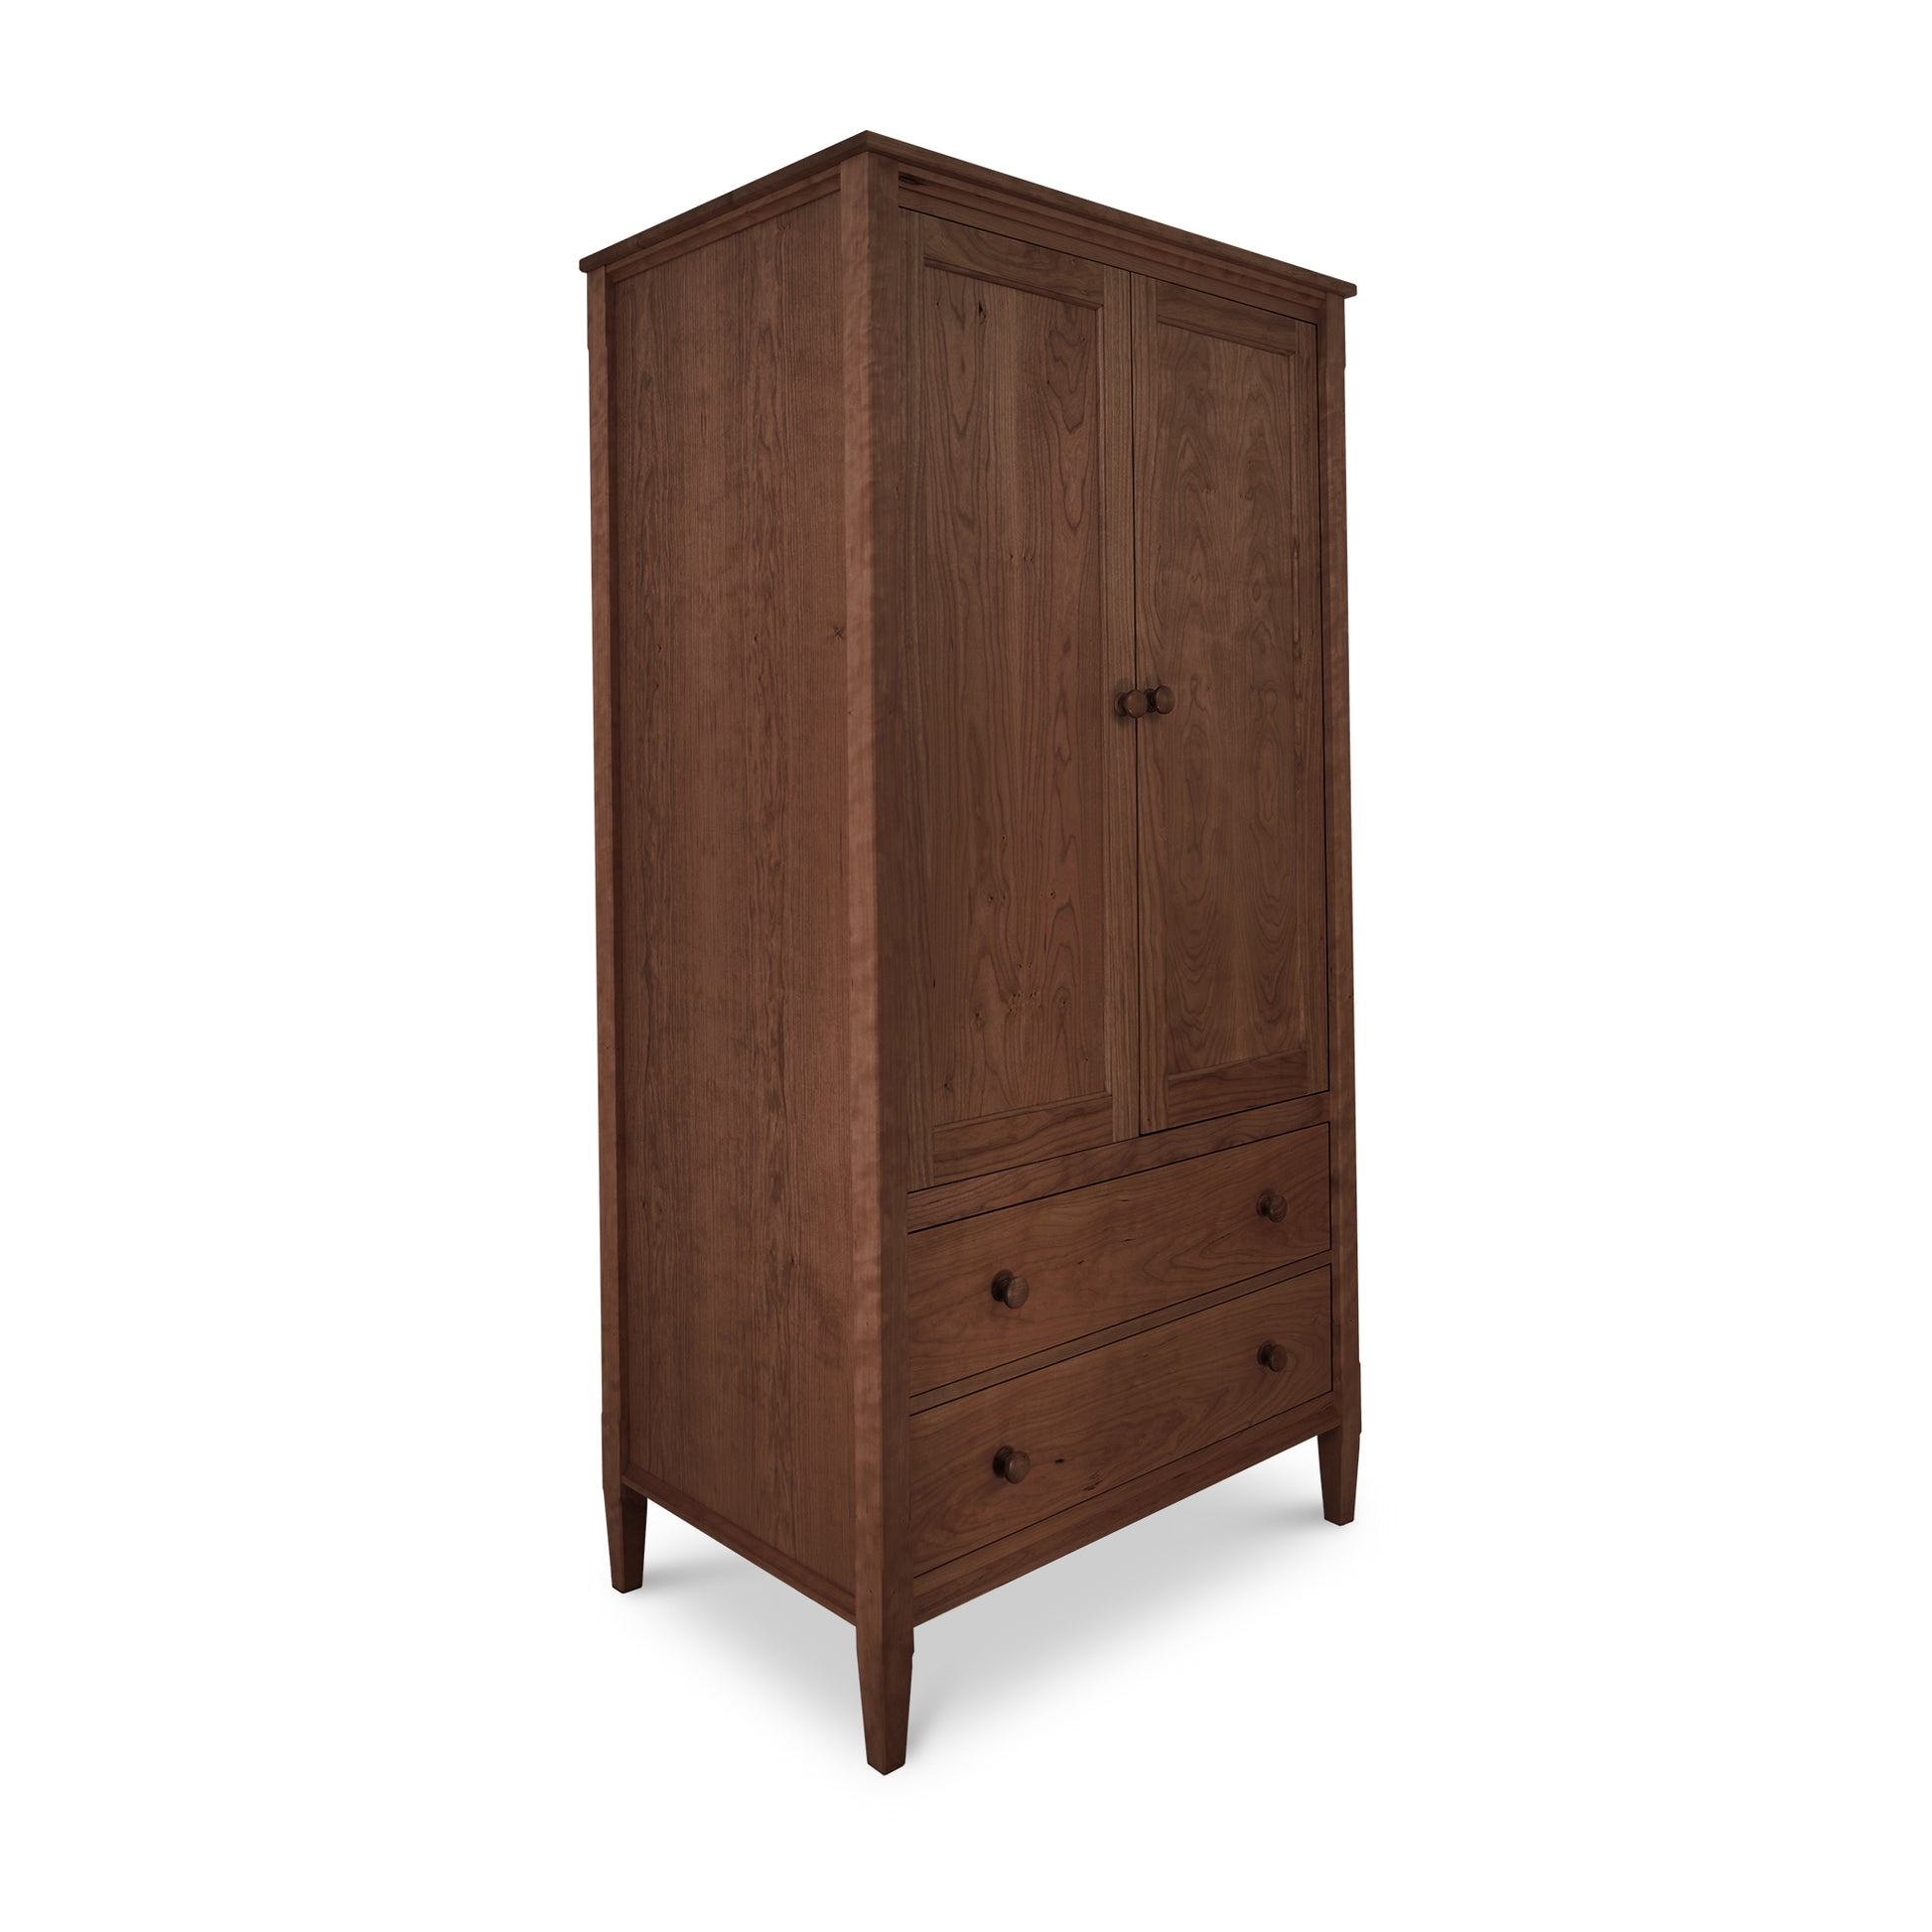 A Maple Corner Woodworks Vermont Shaker Armoire, a wooden wardrobe of heirloom quality with two doors above and a drawer below, standing against an isolated white background.